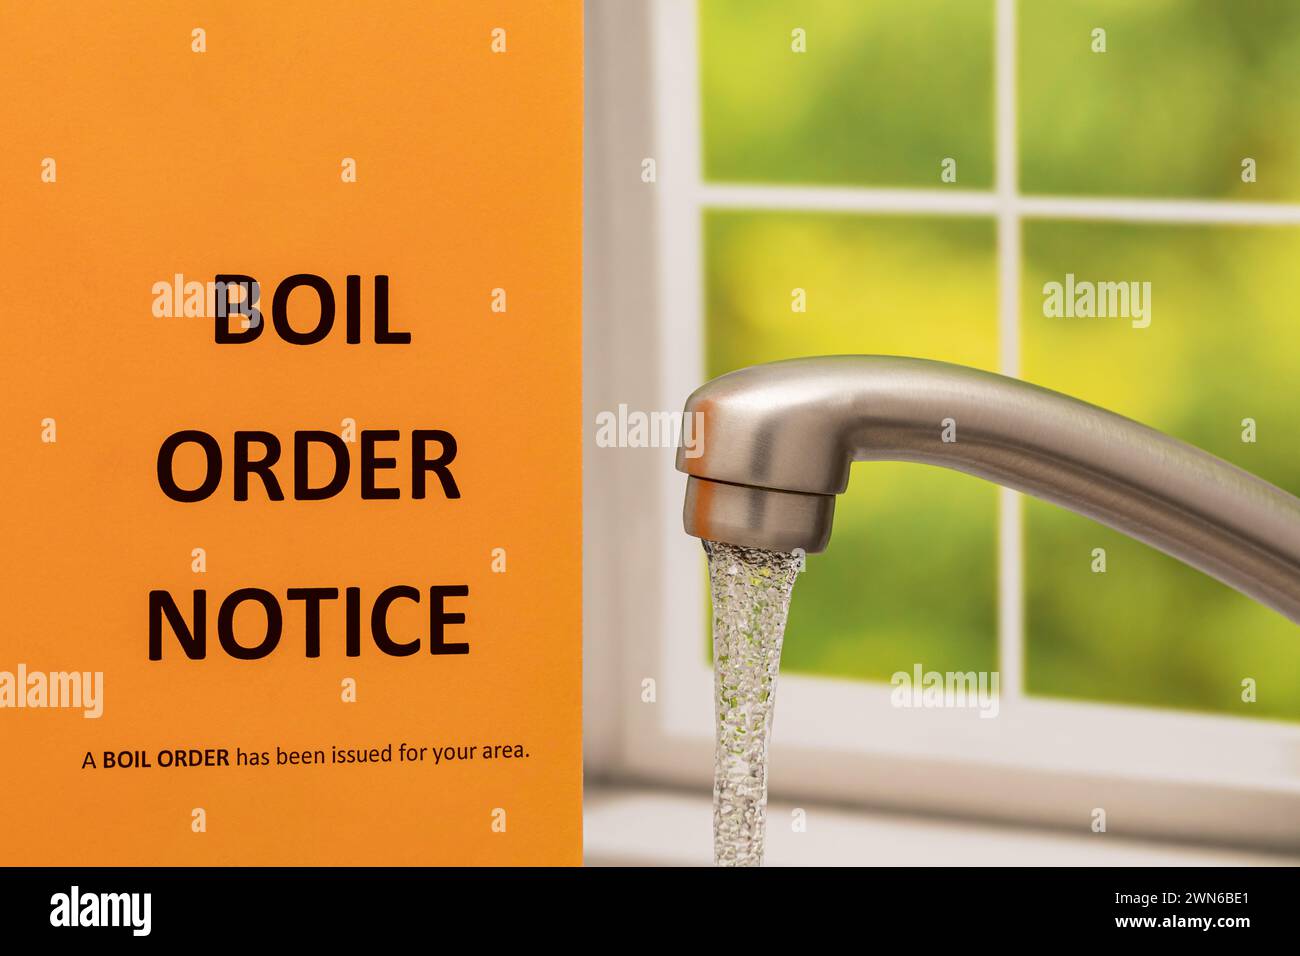 Boil order notice and kitchen faucet. Clean, contaminated, dirty or broken drinking water supply concept. Stock Photo